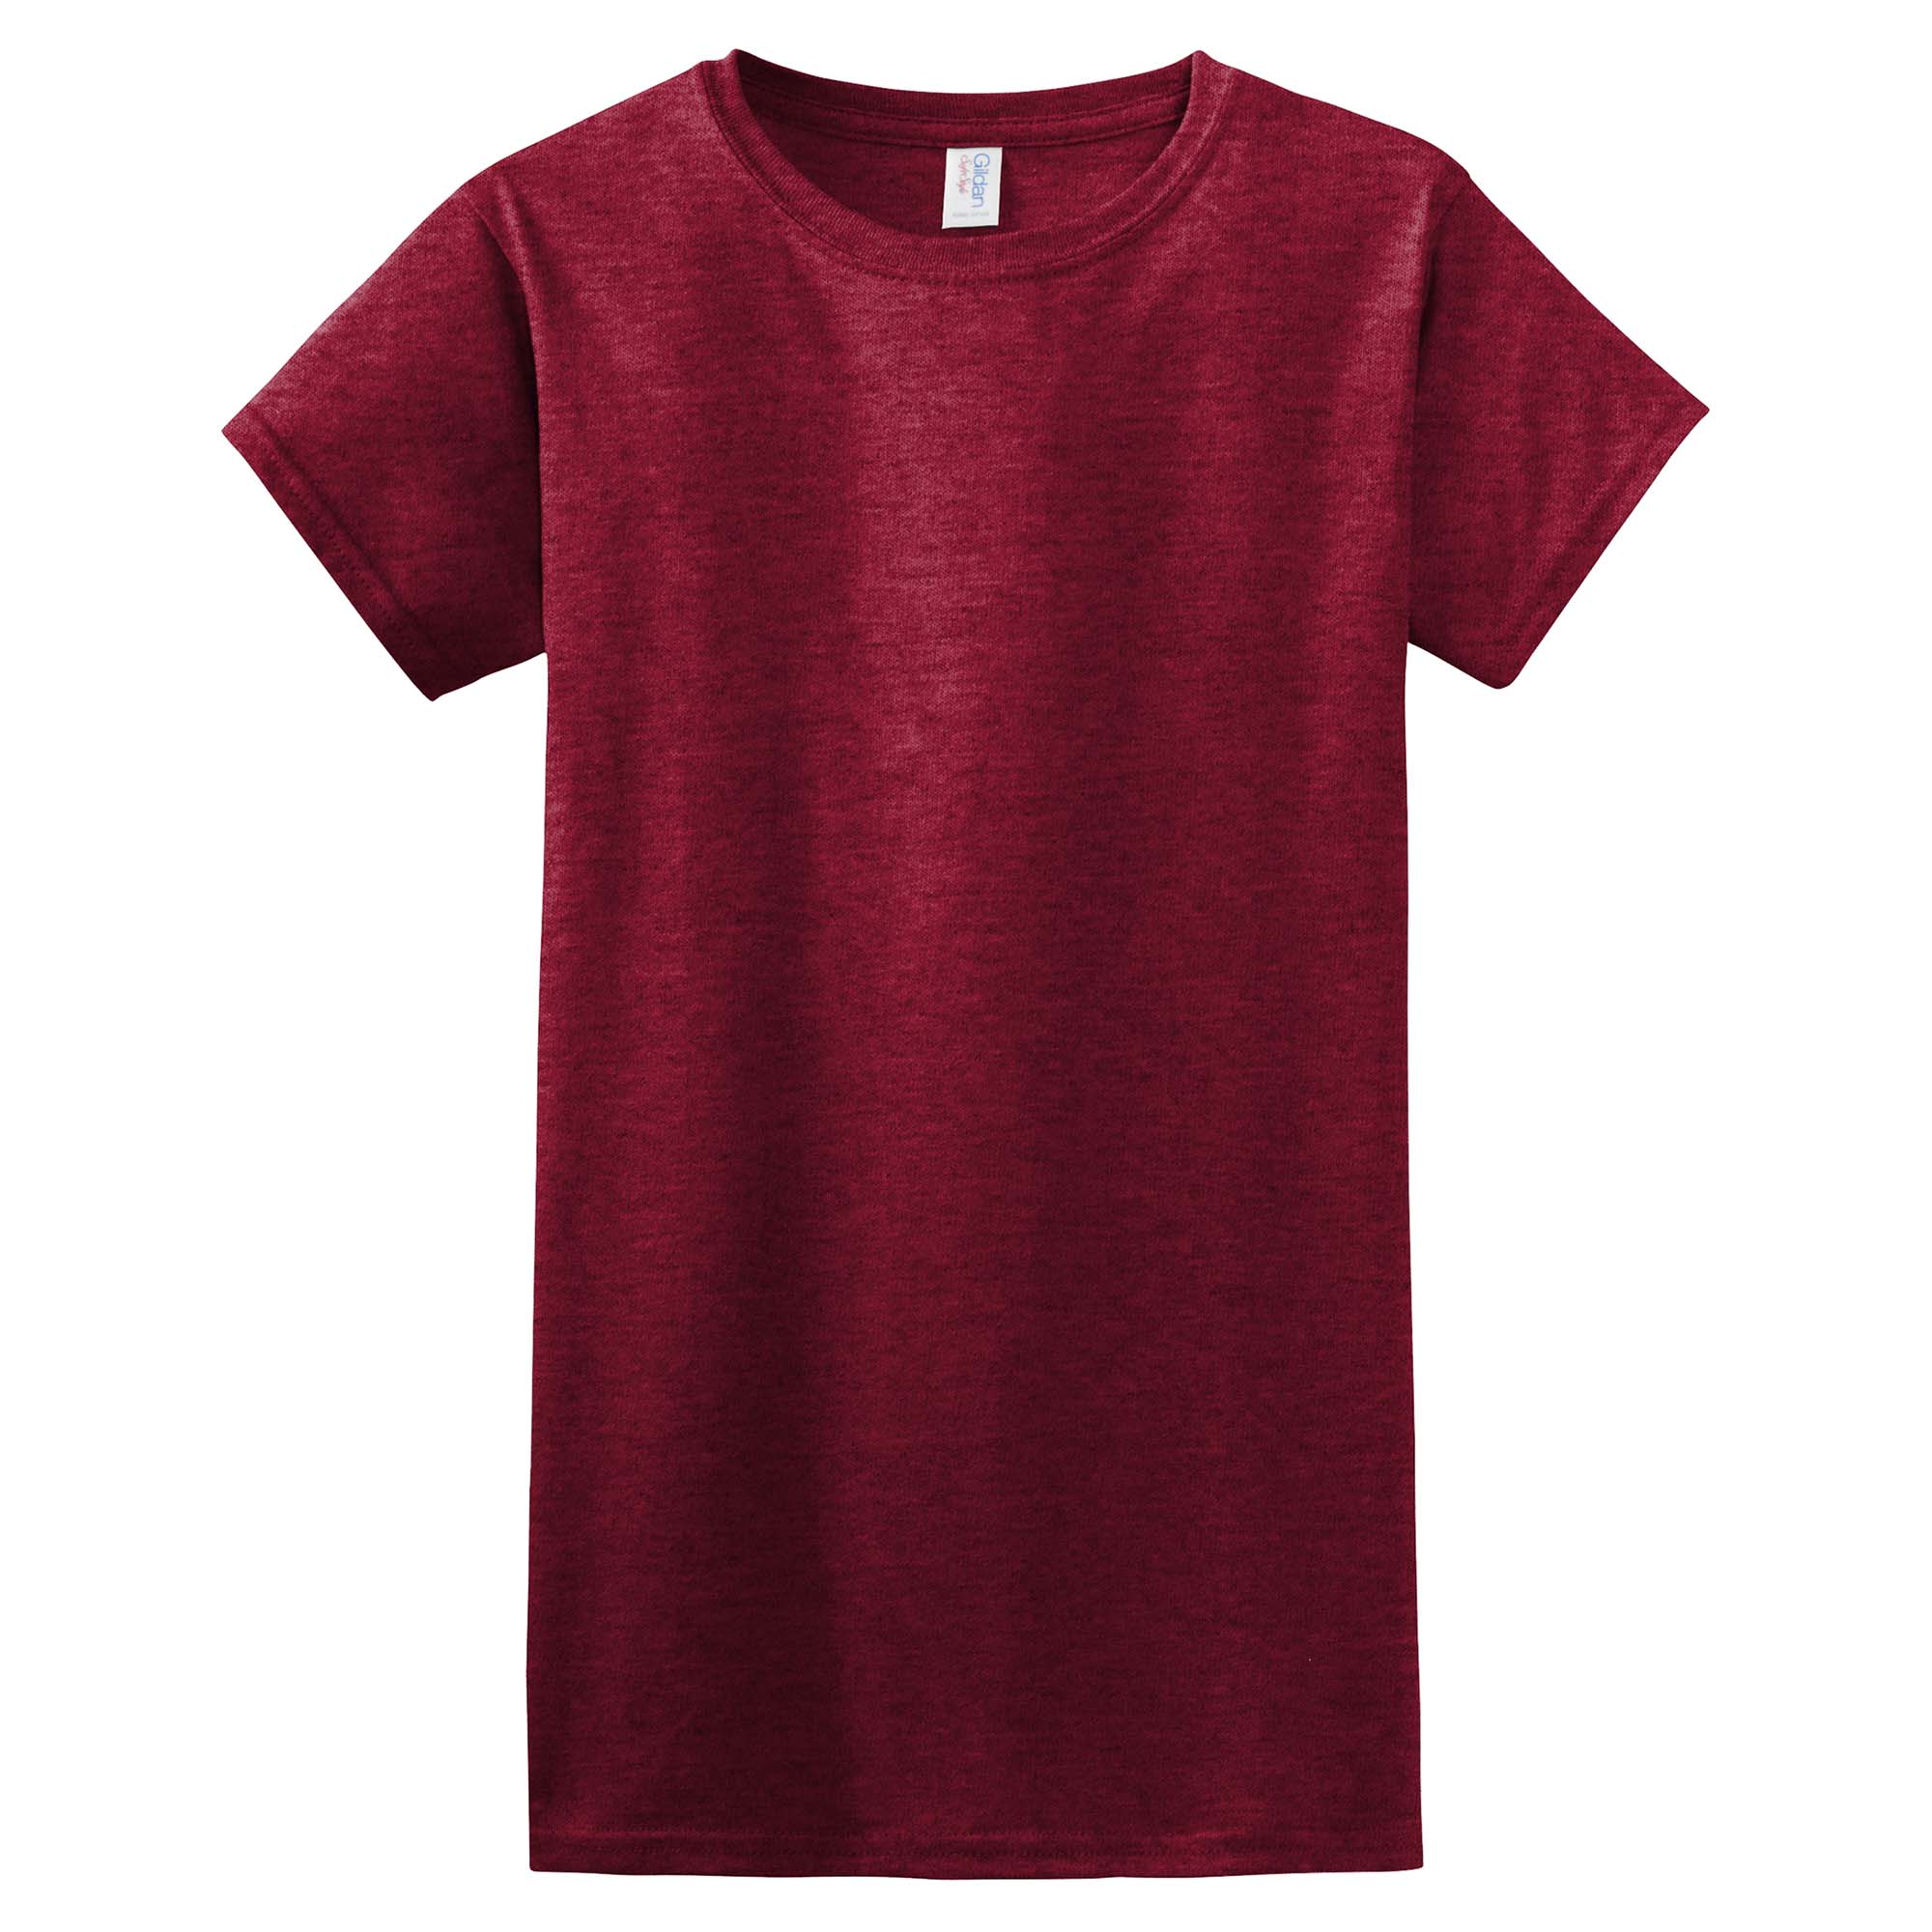 Gildan 64000l Softstyle Junior Fit T Shirt Antique Cherry Red Full